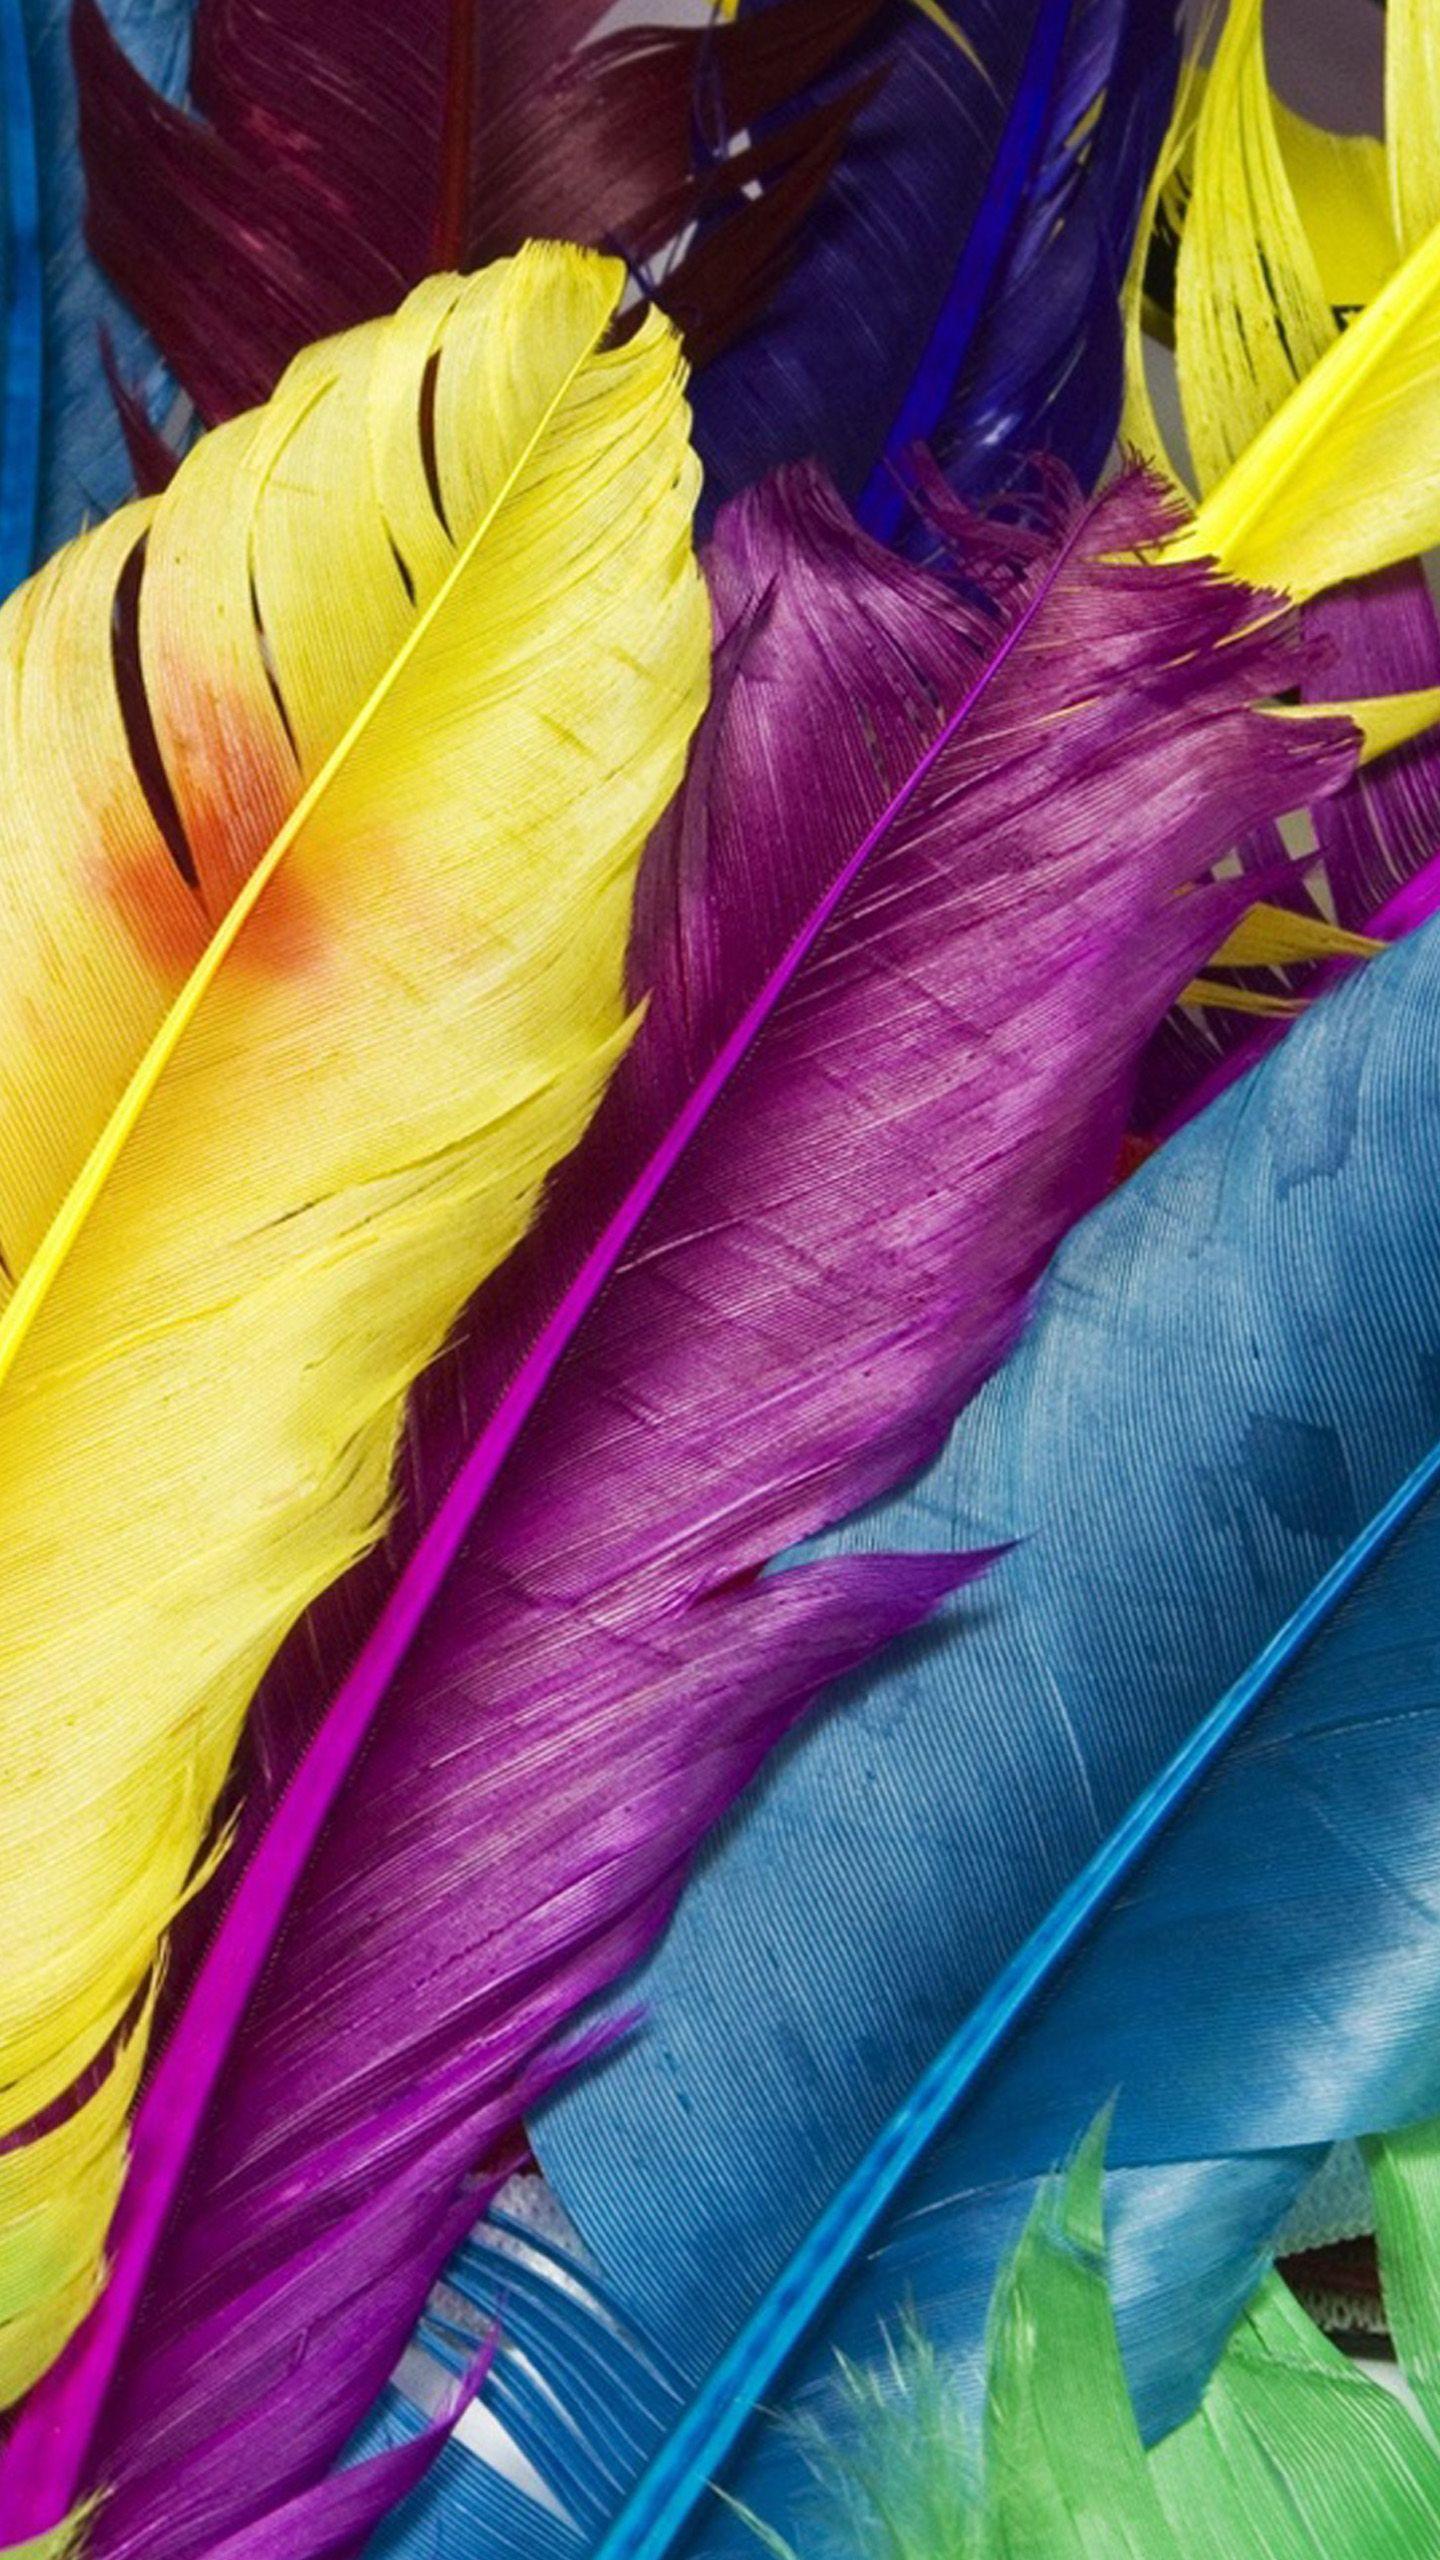 Buy Print a Wall Paper Blue Peacock Feathers PVC Free Wallpaper Online   Natural  Floral Wallpapers  Wallpapers  Furnishings  Pepperfry Product